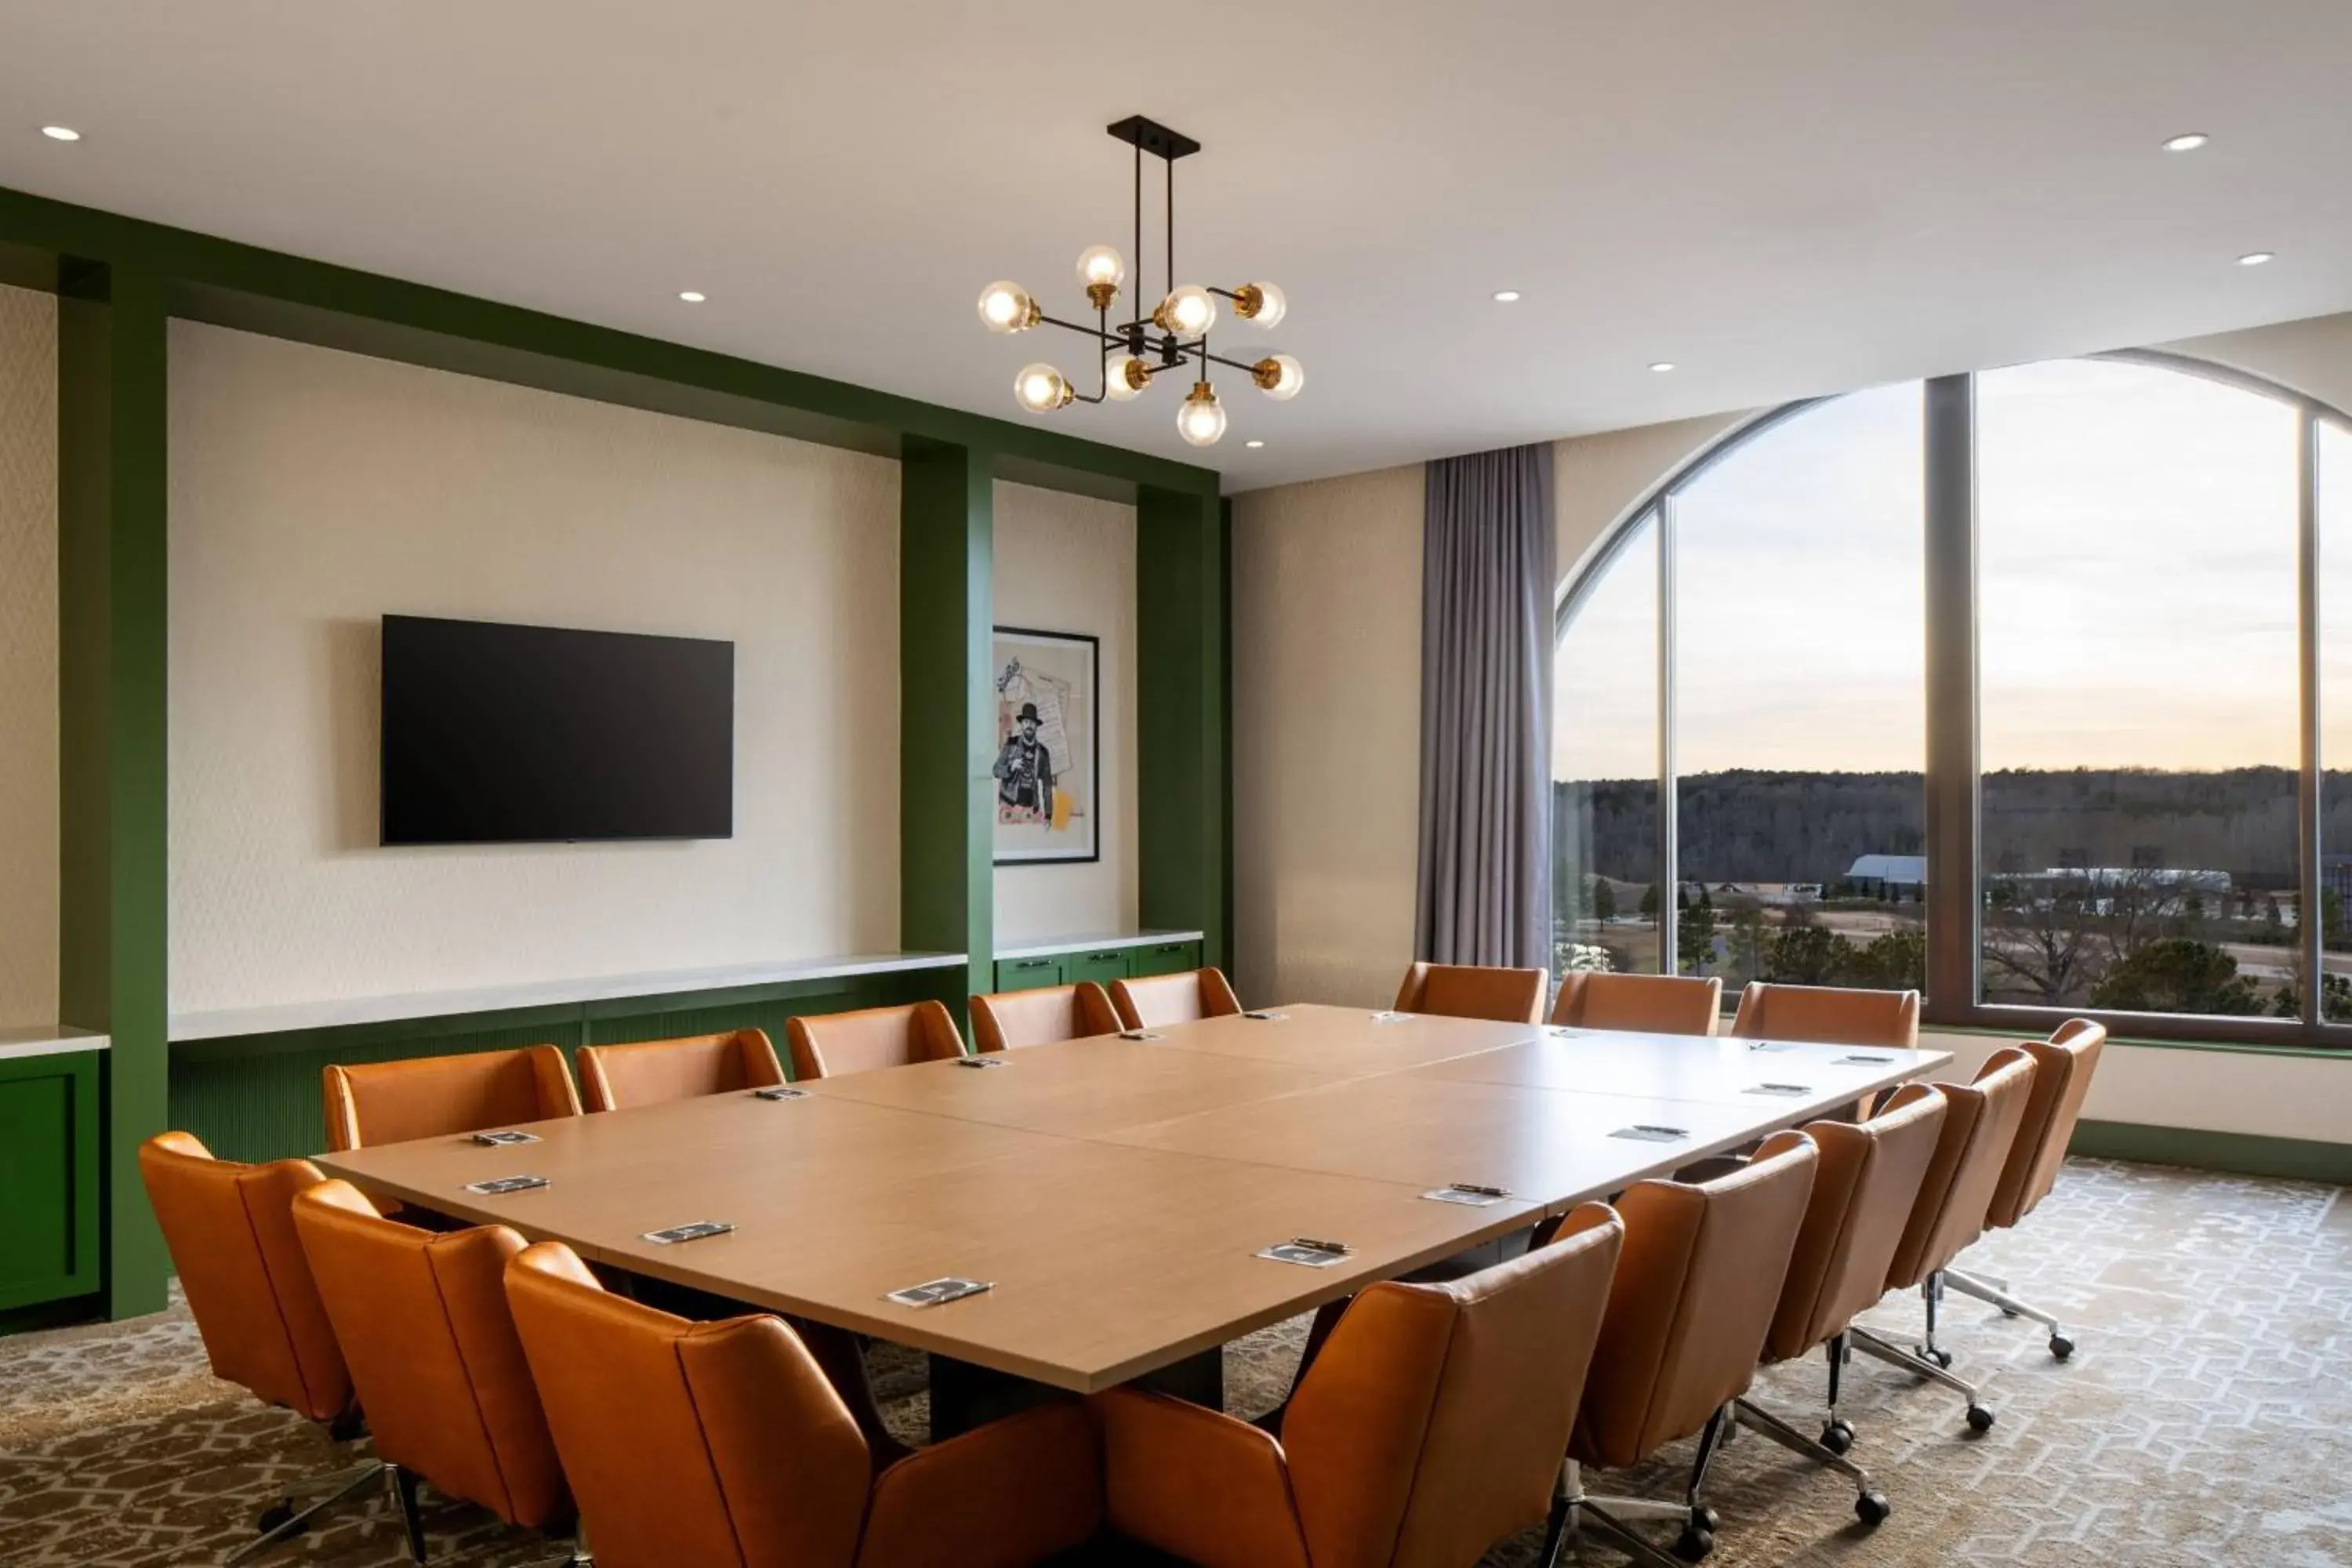 Meeting/conference room in Trilith Guesthouse, Fayetteville, GA, a Tribute Portfolio Hotel